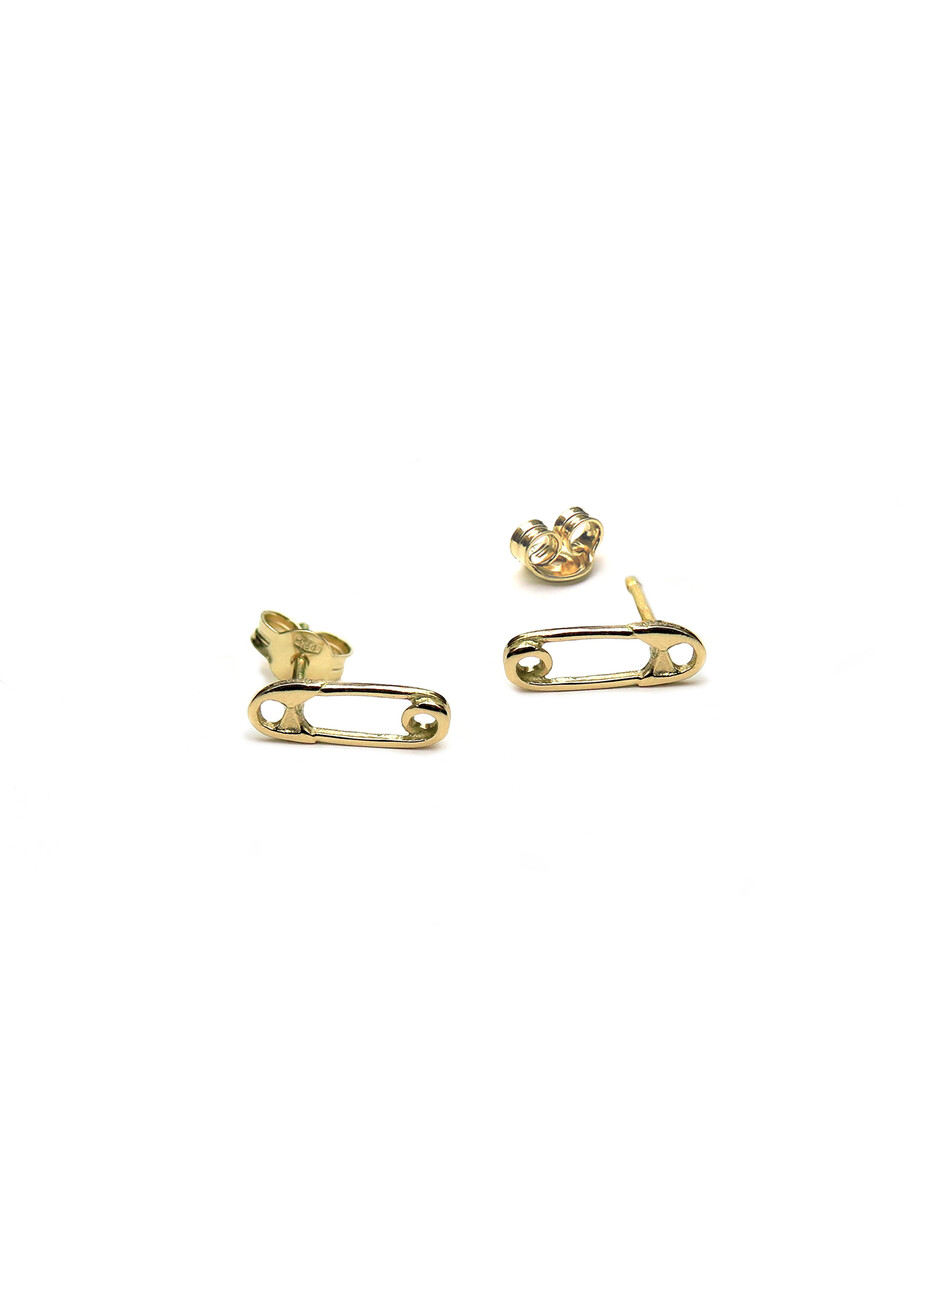 Micro Safetypin in 18kt solid gold